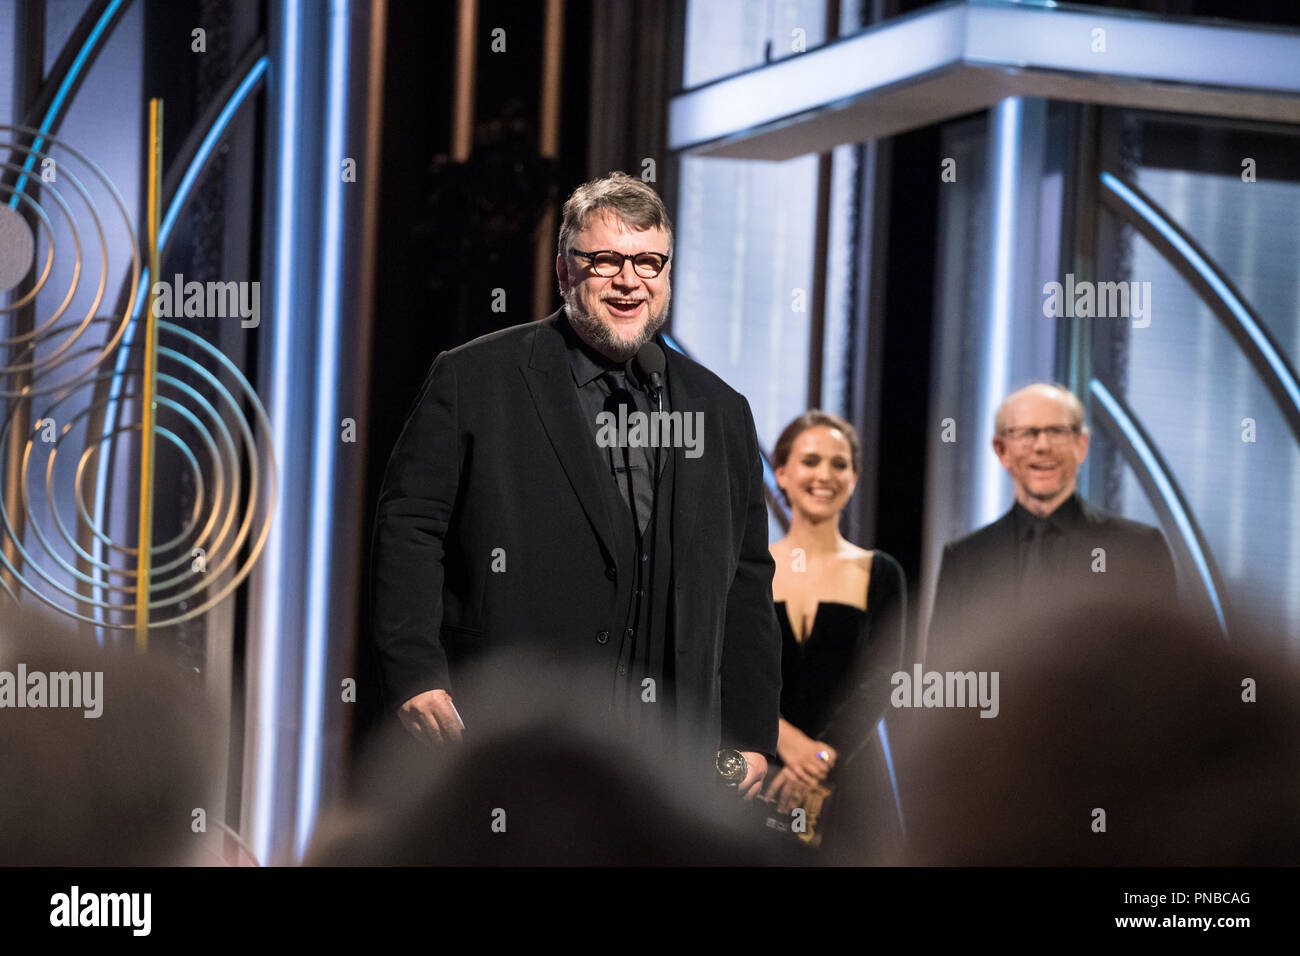 The Golden Globe is awarded to Guillermo del Toro for BEST DIRECTOR – MOTION PICTURE for 'The Shape of Water' at the 75th Annual Golden Globe Awards at the Beverly Hilton in Beverly Hills, CA on Sunday, January 7, 2018.  File Reference # 33508 577JRC  For Editorial Use Only -  All Rights Reserved Stock Photo